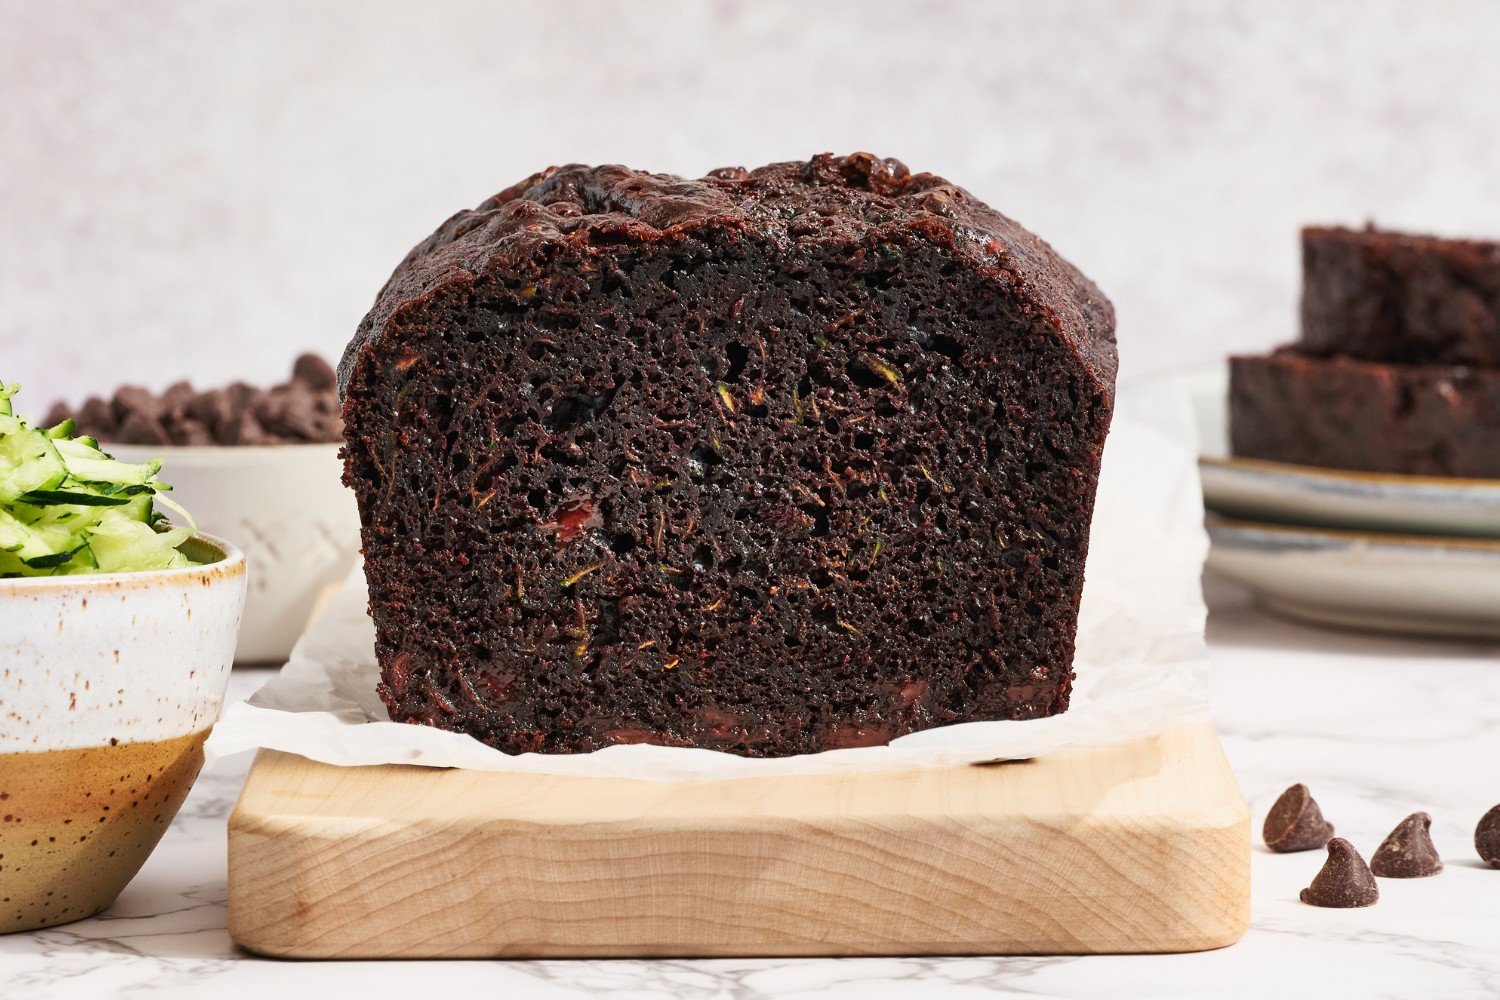 the sliced chocolate zucchini bread, highlighting how moist and rich this bread is.